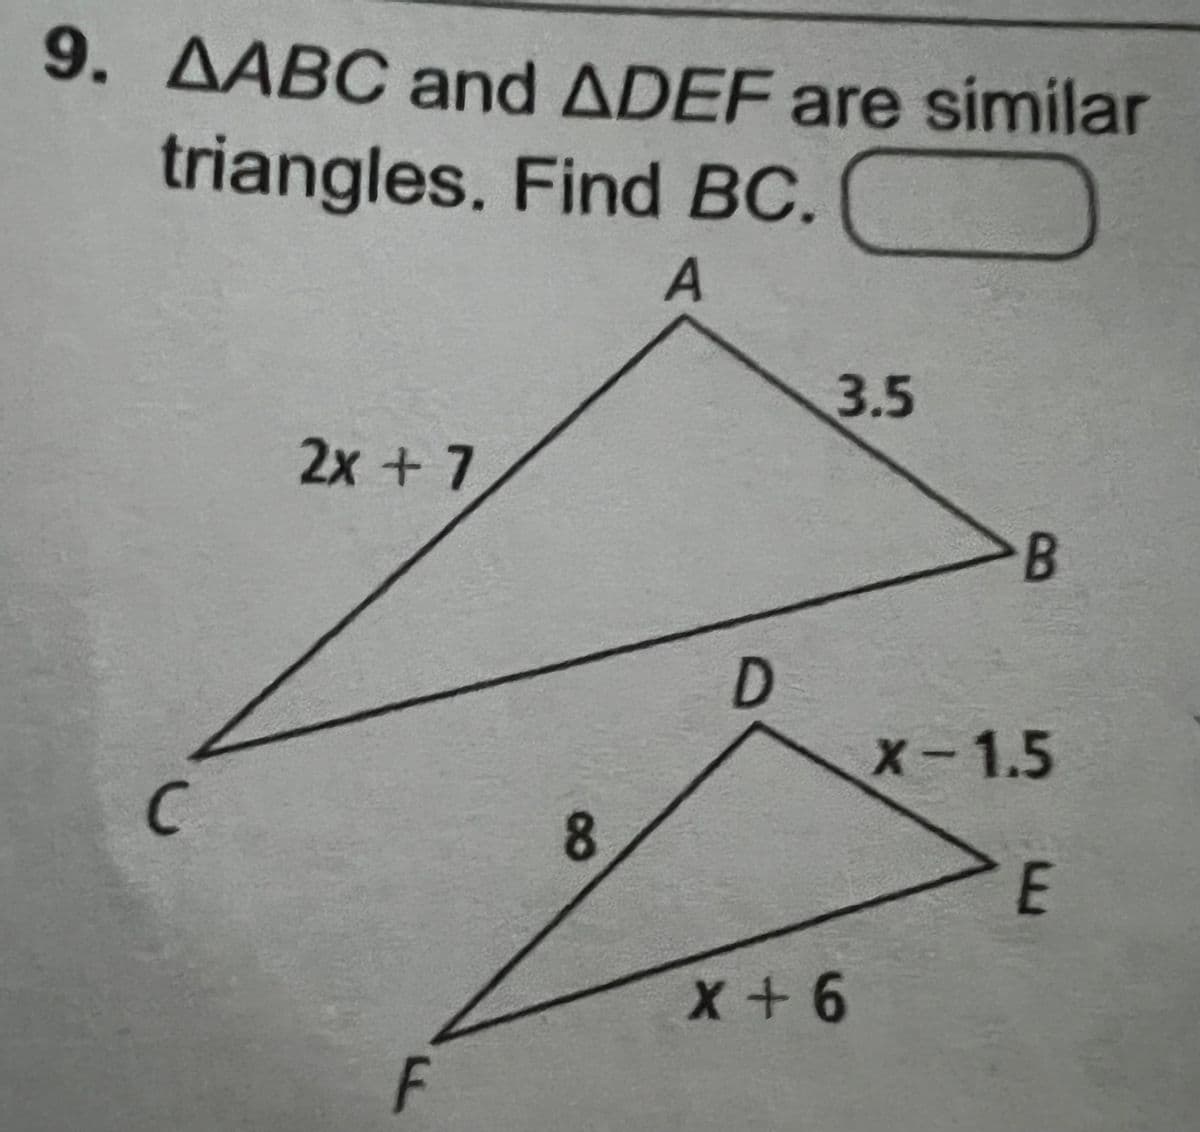 9. AABC and ADEF are similar
triangles. Find BC.
A
C
2x + 7
F
8
D
3.5
X+6
B
X-1.5
E